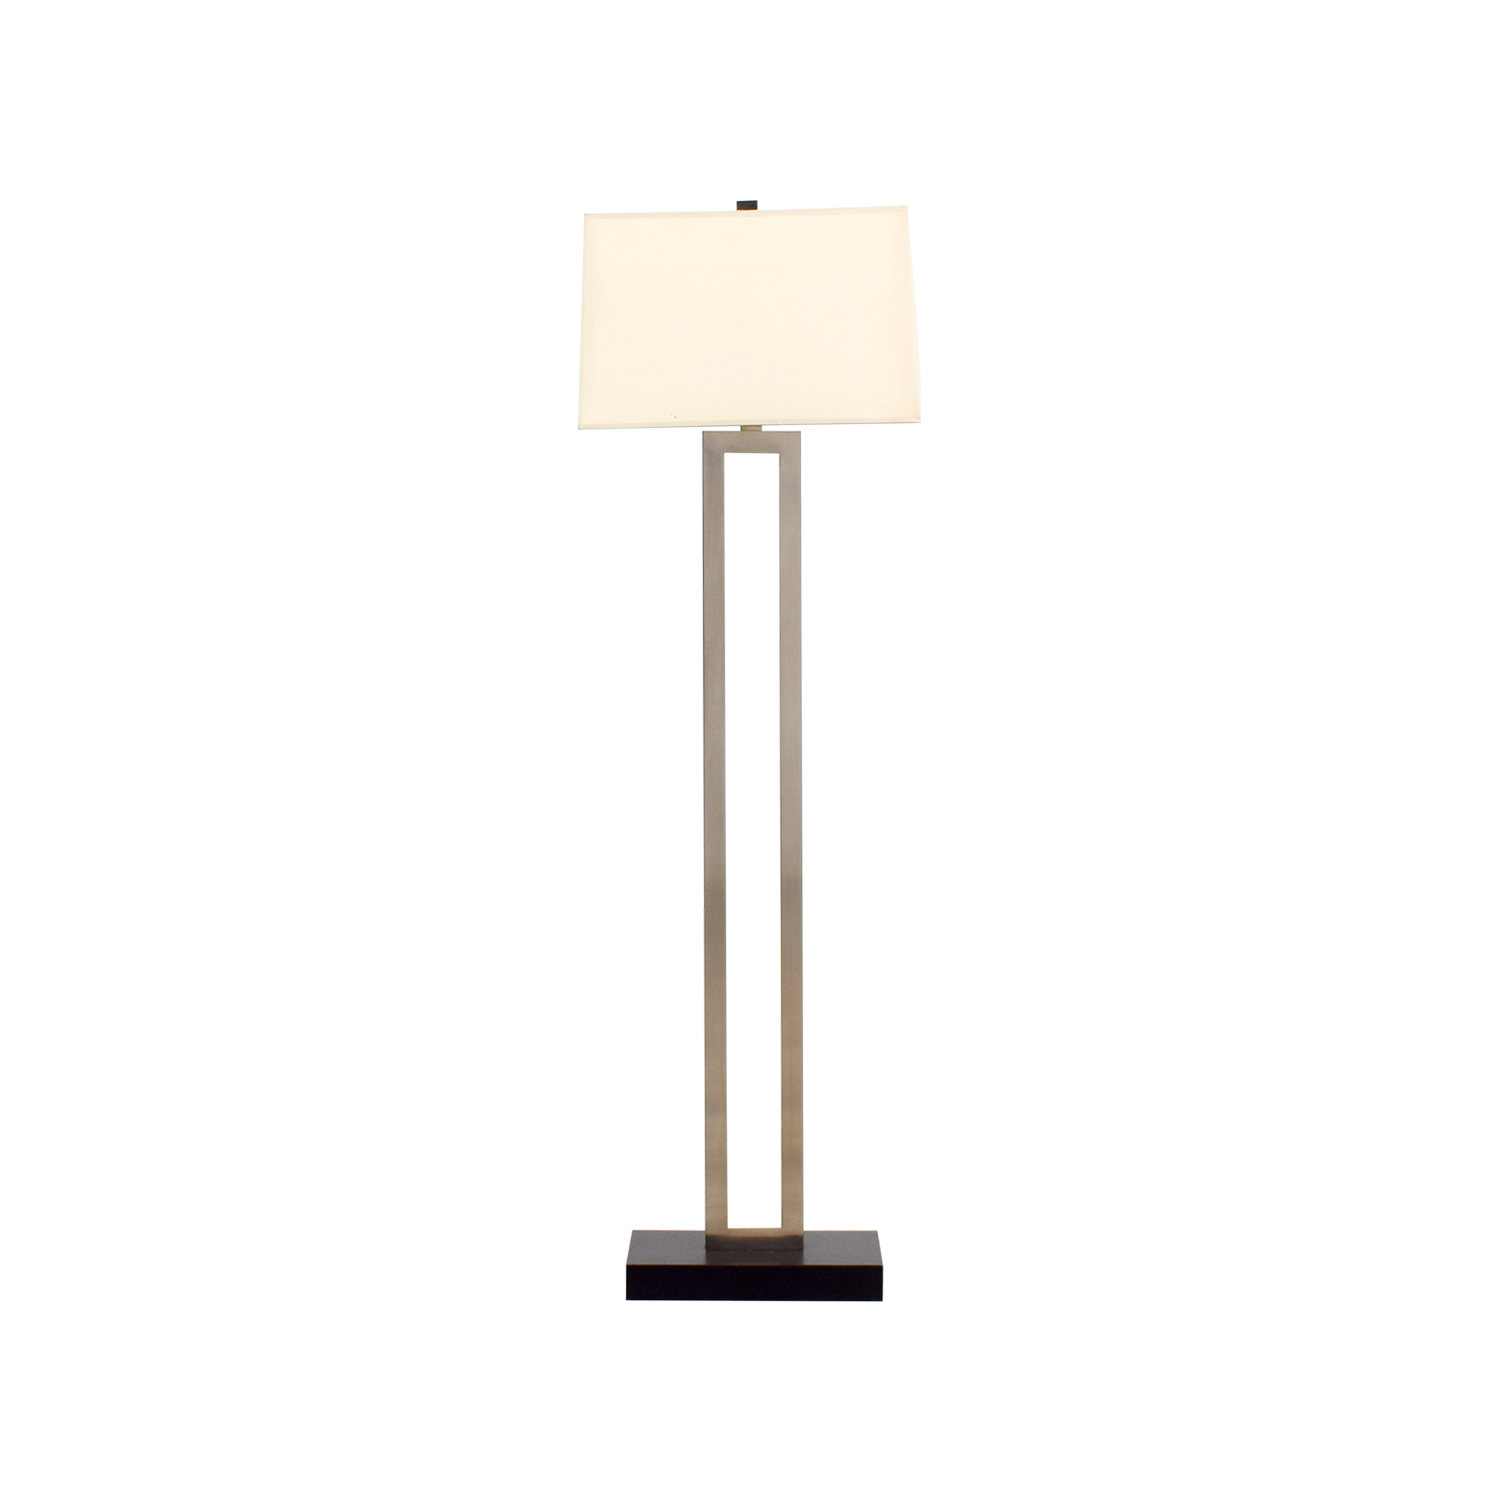 70 Off Crate Barrel Crate Barrel Floor Lamp Decor with regard to sizing 1500 X 1500